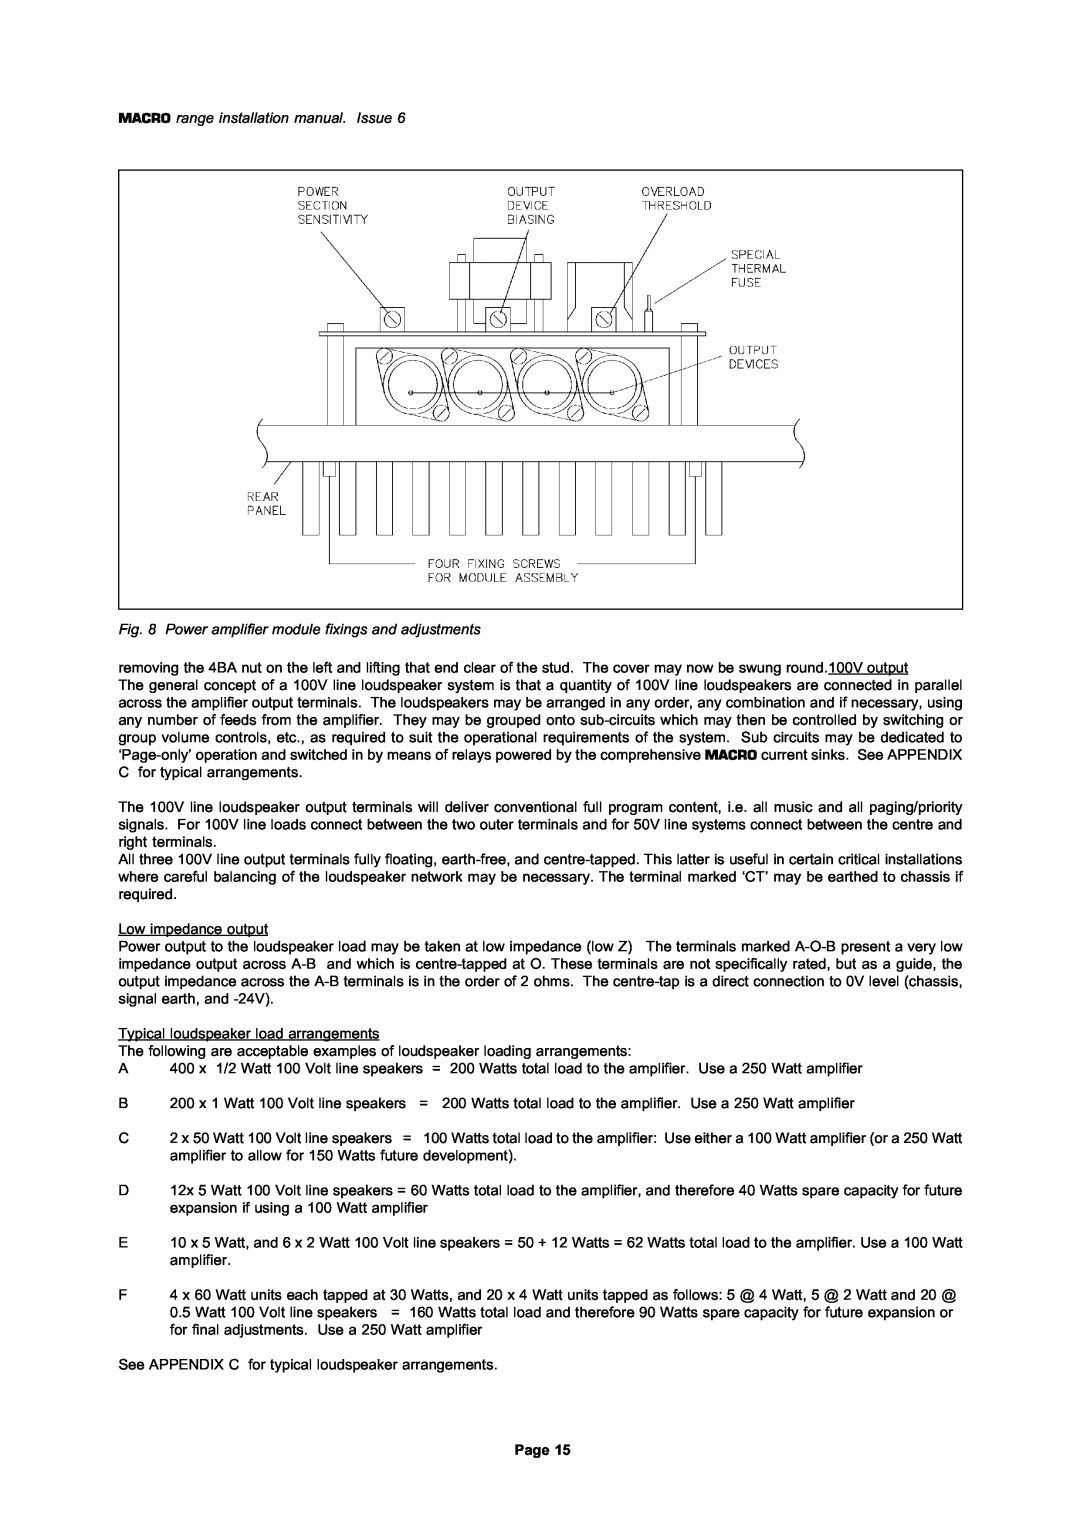 Mustang M1008 MACRO range installation manual. Issue, Low impedance output, Typical loudspeaker load arrangements, Page 